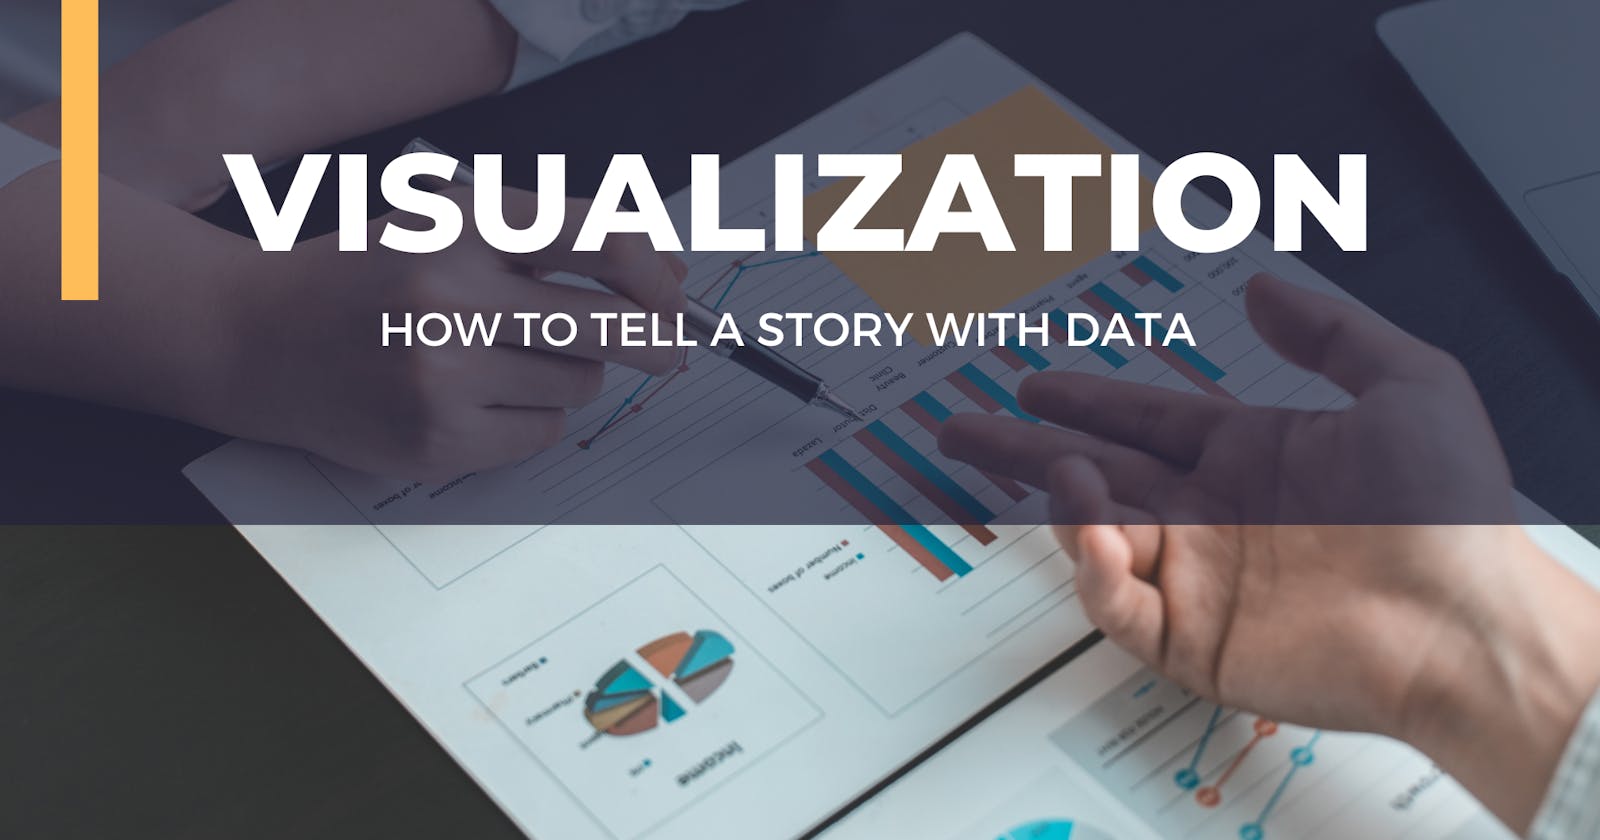 An Introduction to Data Visualization: How To Tell a Story With Data